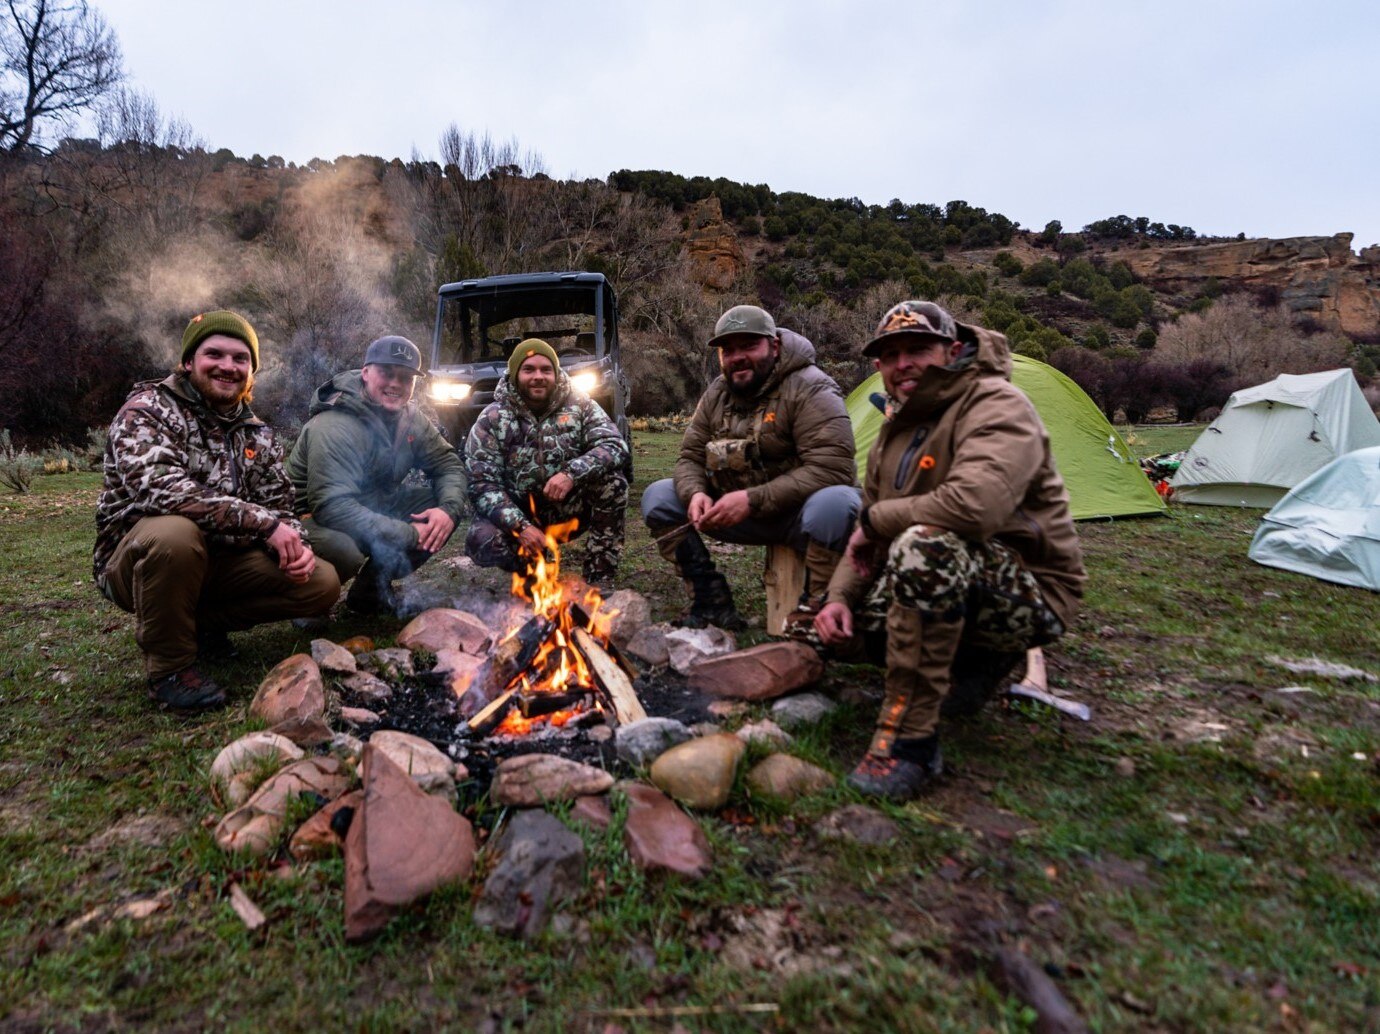 5 members of the Hushin' crew around a camp fire with their Defender and tents set up in the background. 